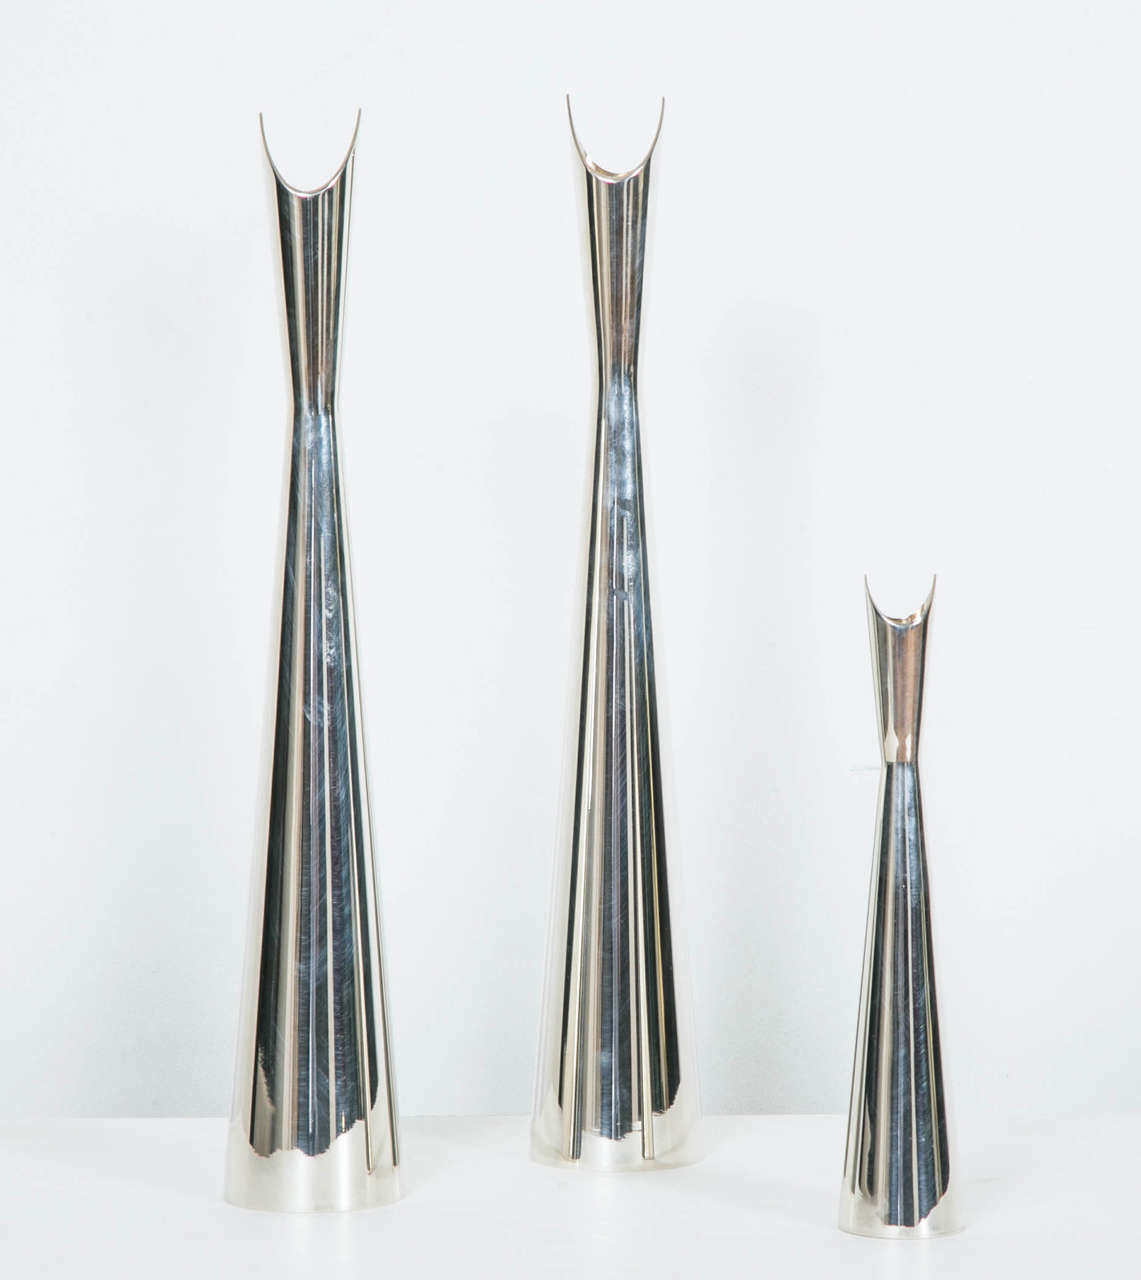 Set of three “Cardinal” silvered metal vases, by Lino Sabattini for Maison Christofle, 1970.
Signed Christofle France.
Measures: Higher 35 x D 6 cm, lower 21 x D 4 cm.

Lino Sabattini (1925) Italian designer specialized in table ware and